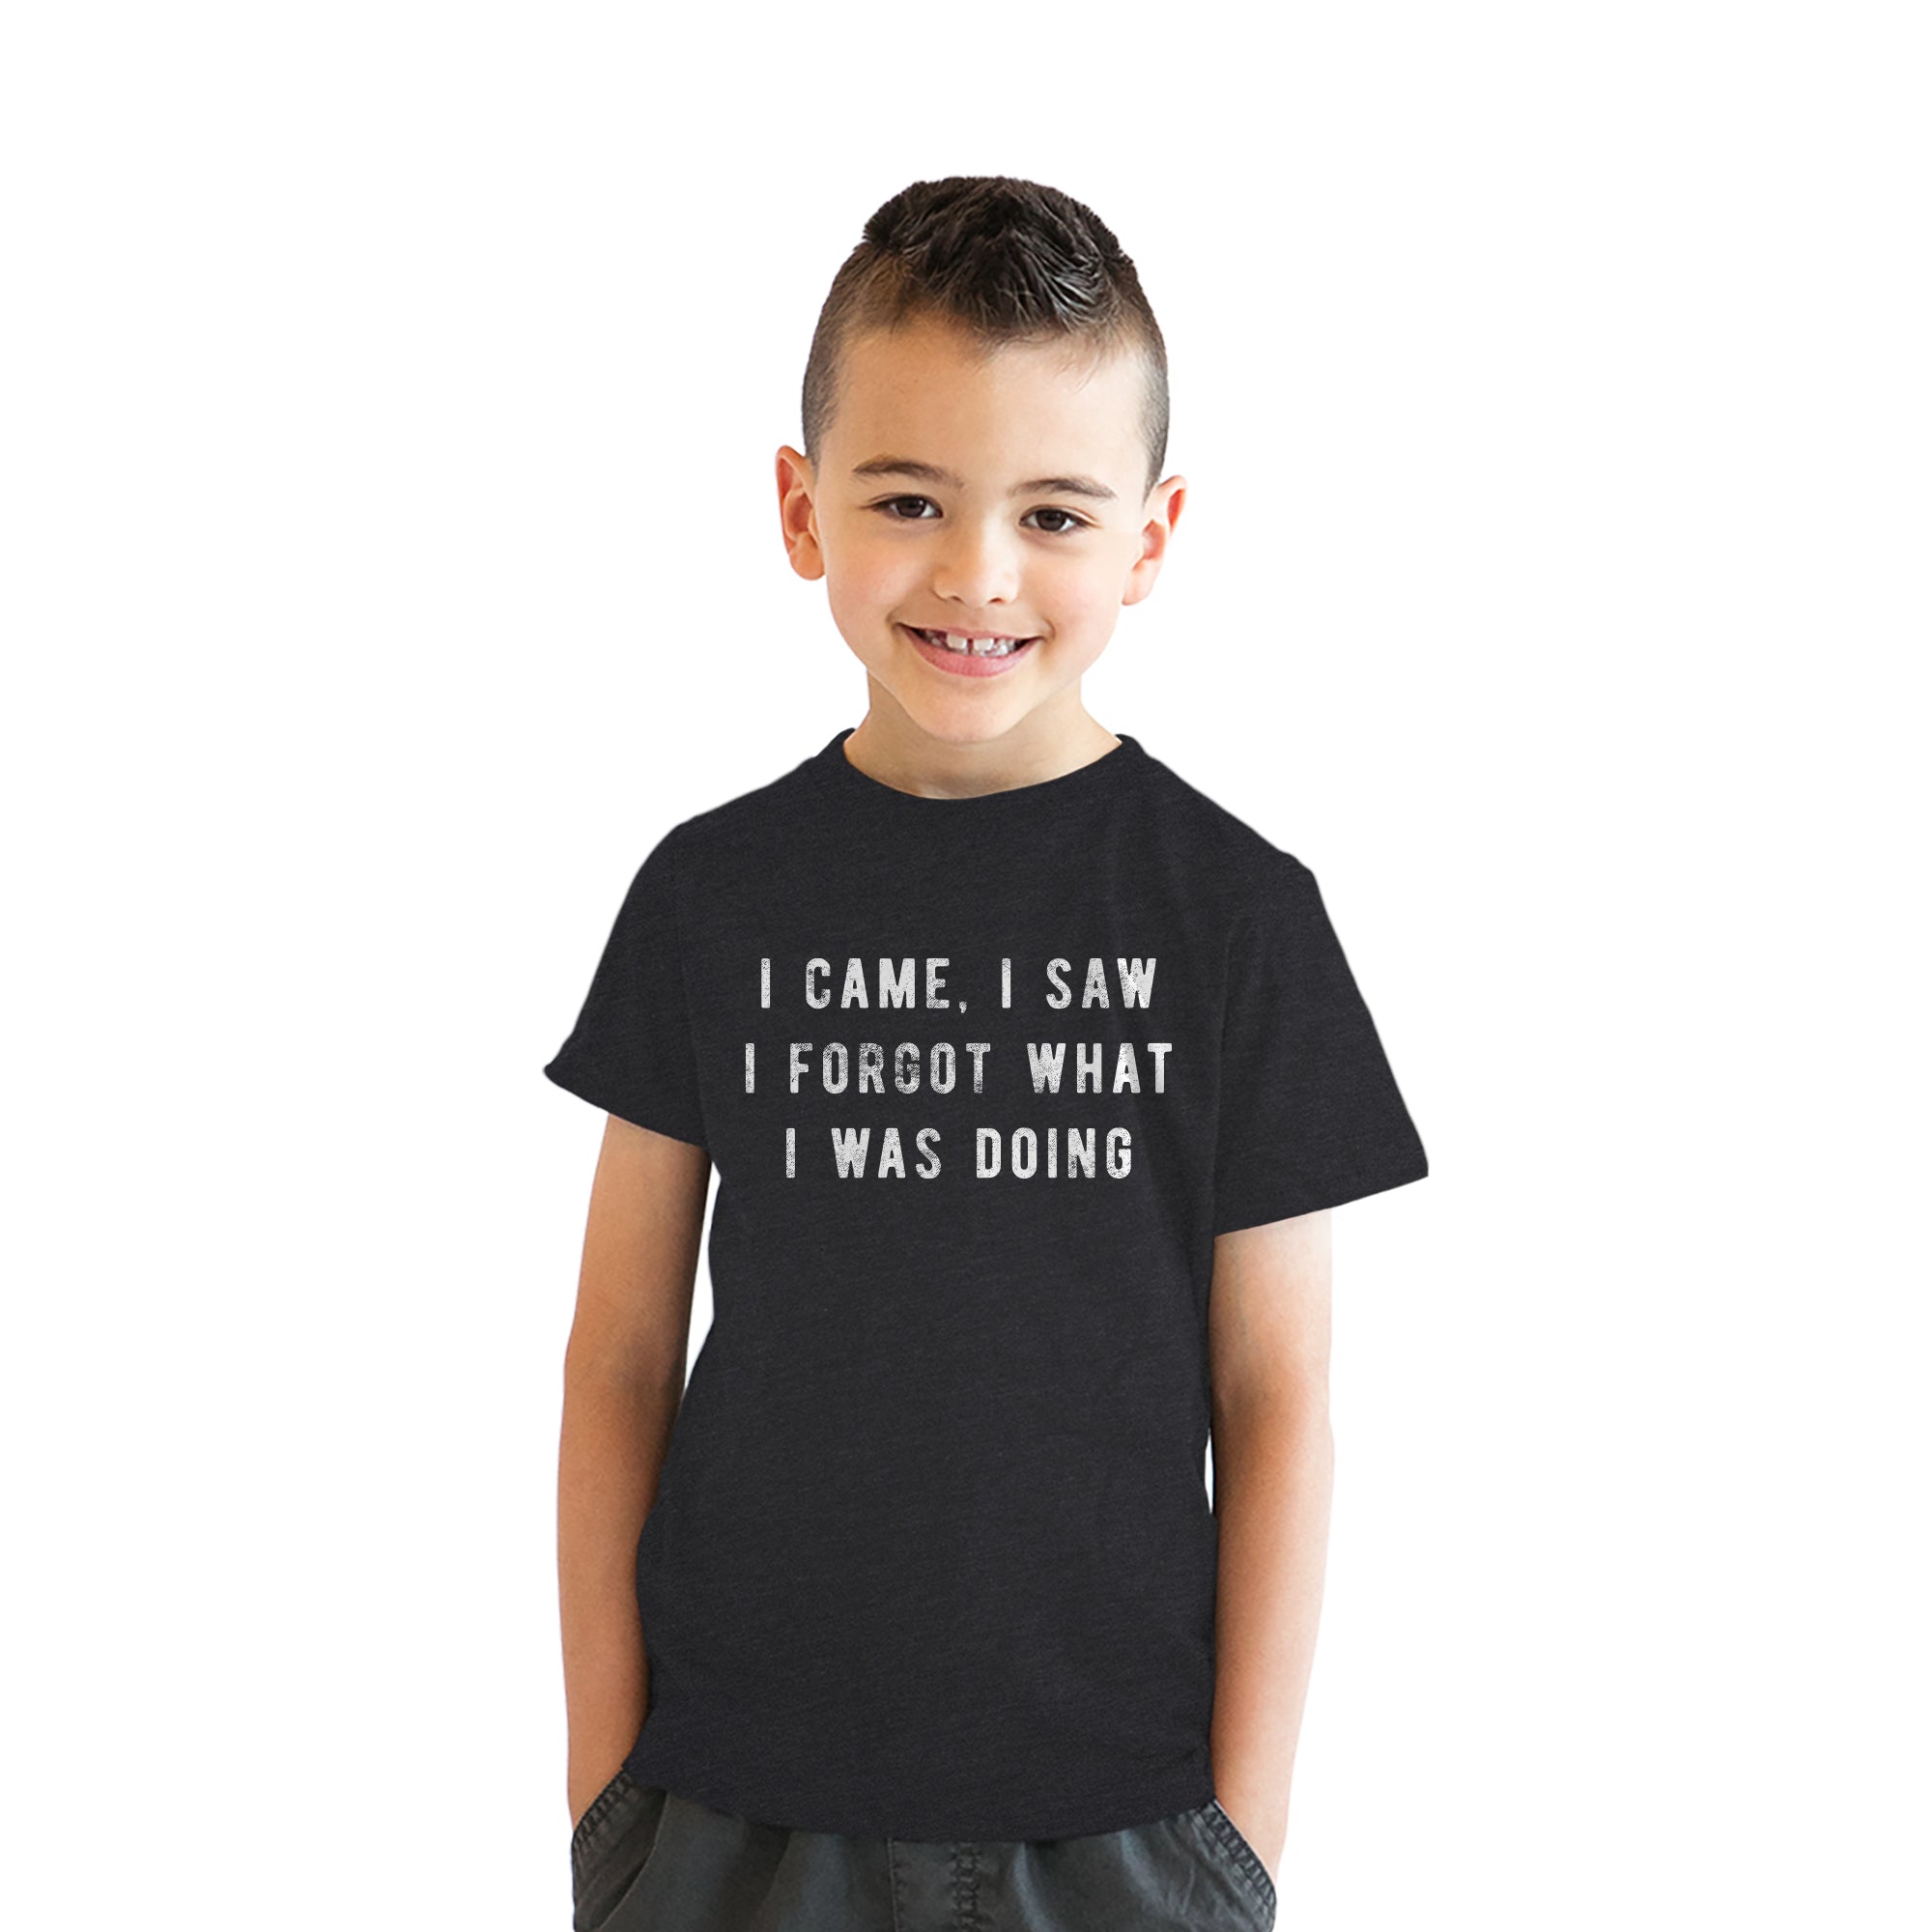 Funny Heather Black - FORGOT I Came I Saw I Forgot What I Was Doing Youth T Shirt Nerdy Sarcastic Tee